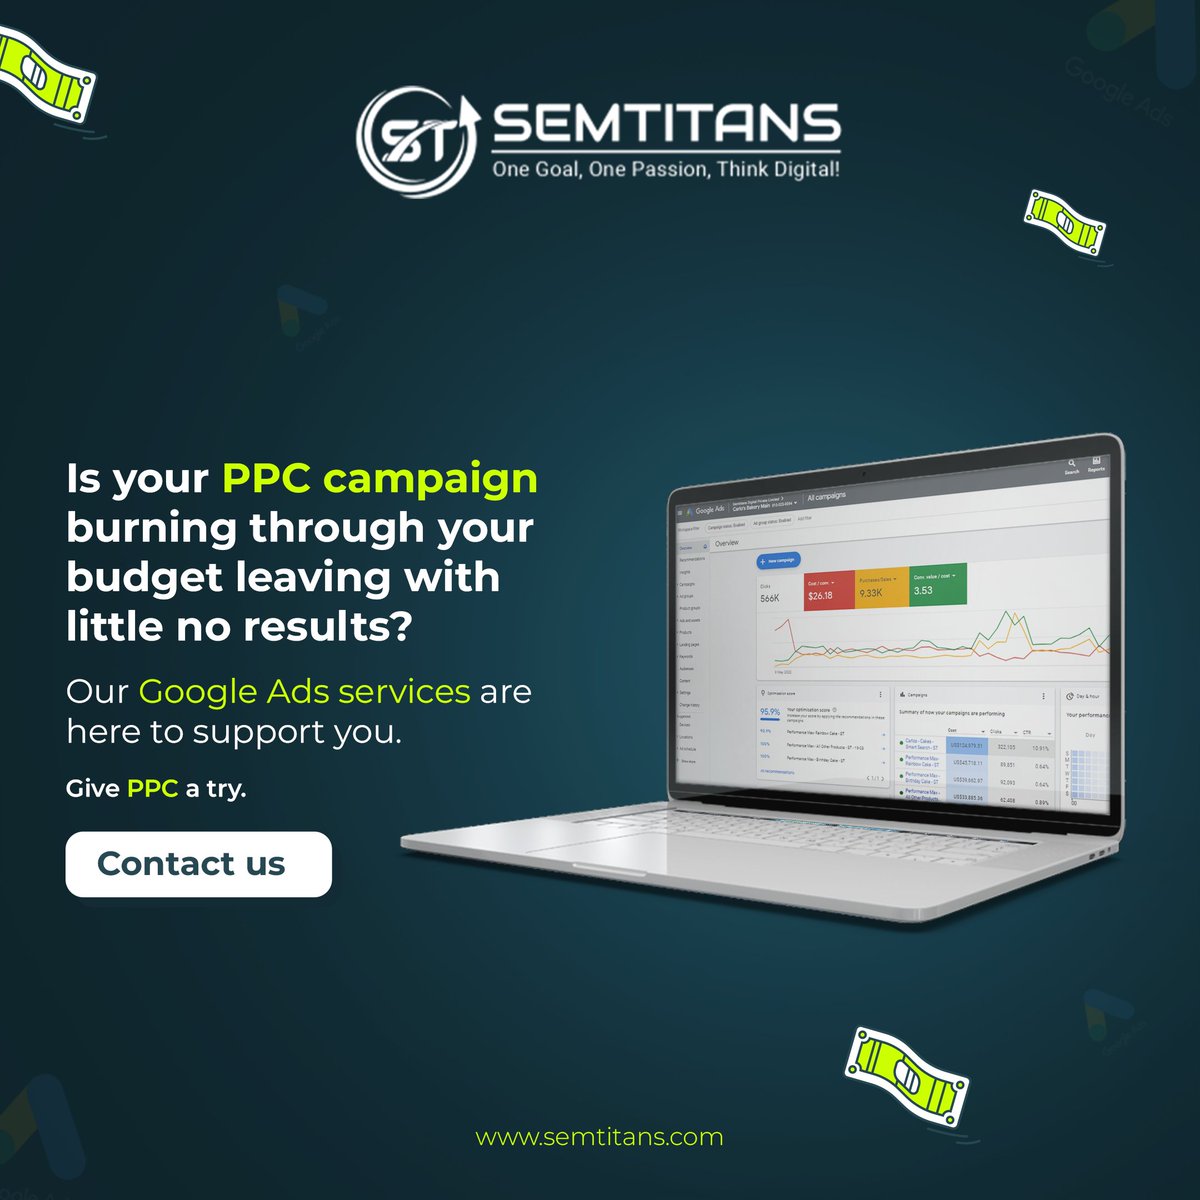 Increase in the number of leads - every #business' dream! We can help you achieve it with our #PPCservices.

Don't wait, visit us at semtitans.com and book a FREE consultation with our experts.

#digitalmarketingagency #onlineadvertising #semtitansdigital #googleads